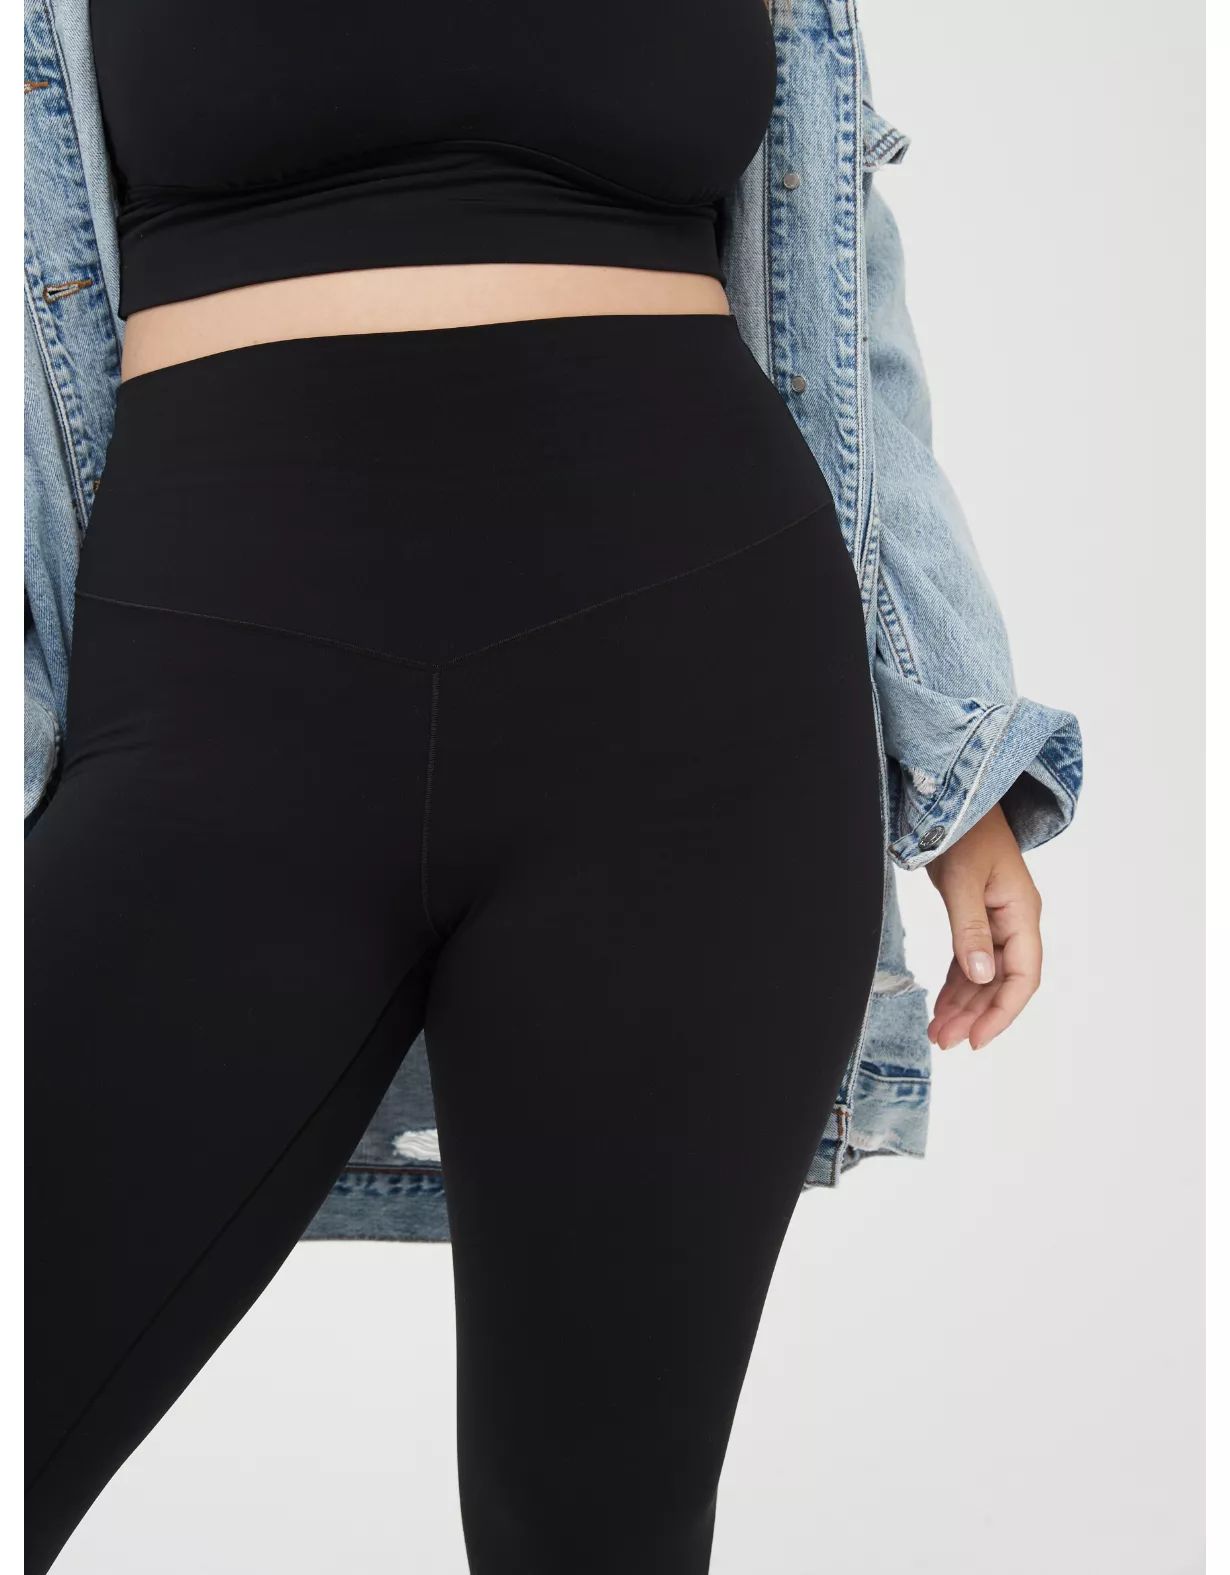 OFFLINE By Aerie Real Me High Waisted Legging | Aerie